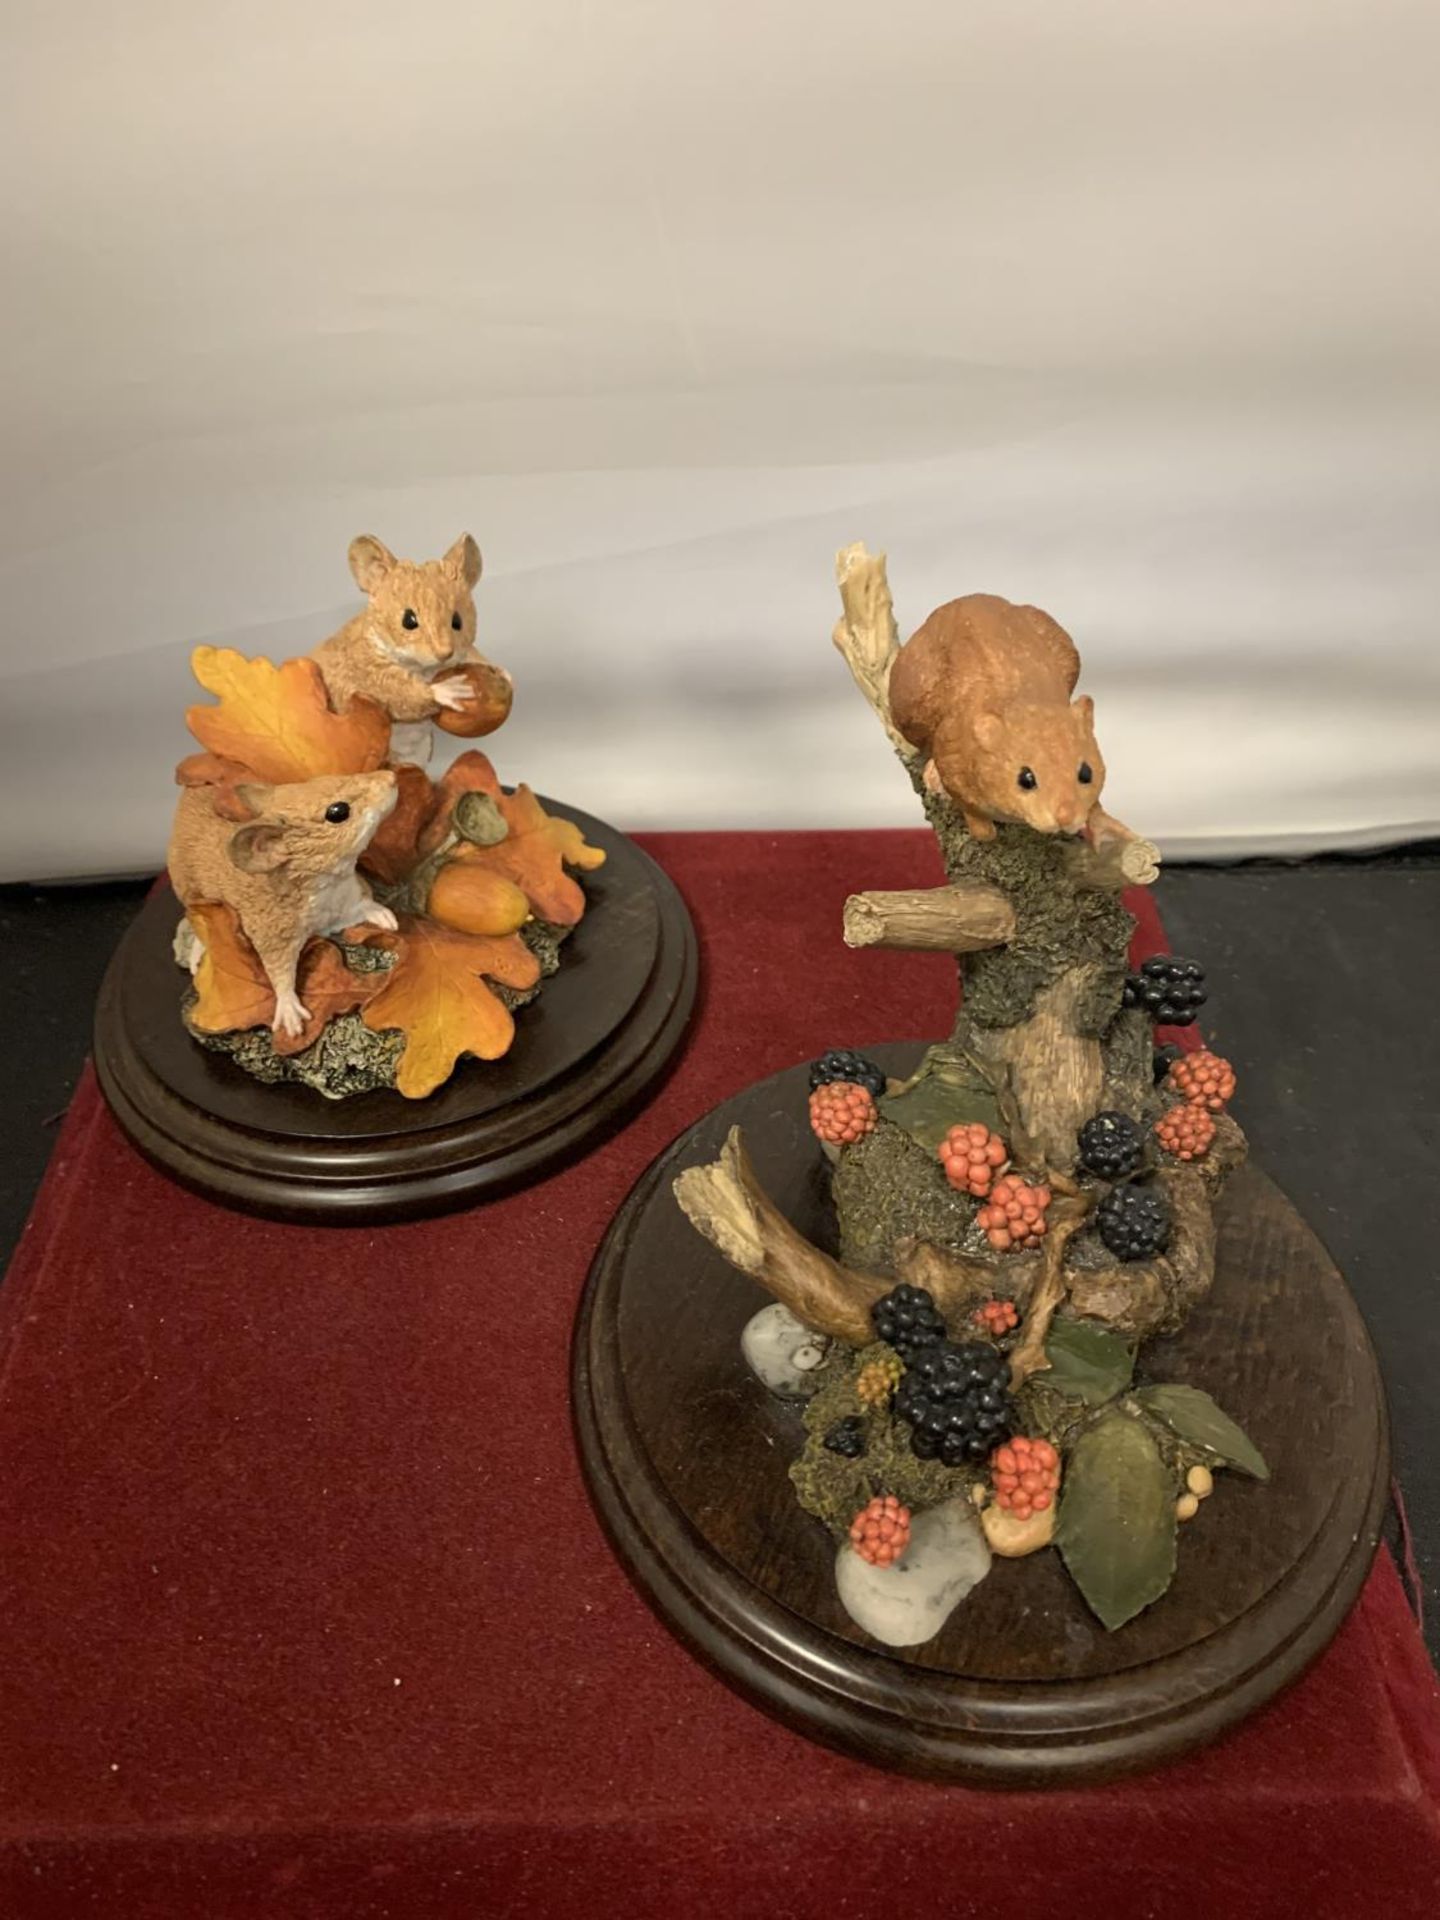 TWO COUNRTY ARTISTS MOUSE FIGURINES ON WOODEN PLINTHS WITH BOXES (NOT GUARANTEED MATCHING) - Image 2 of 4